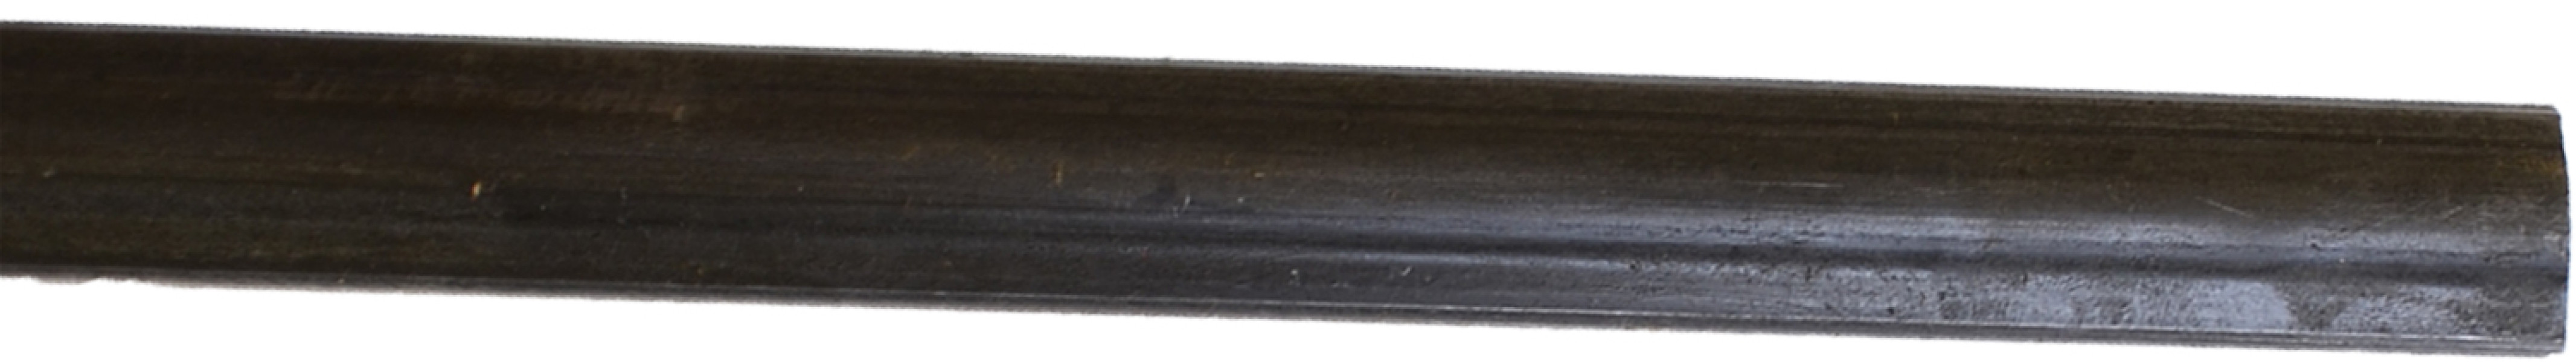 Image of Universal Joint Tube from SKF. Part number: SKF-UJ1062